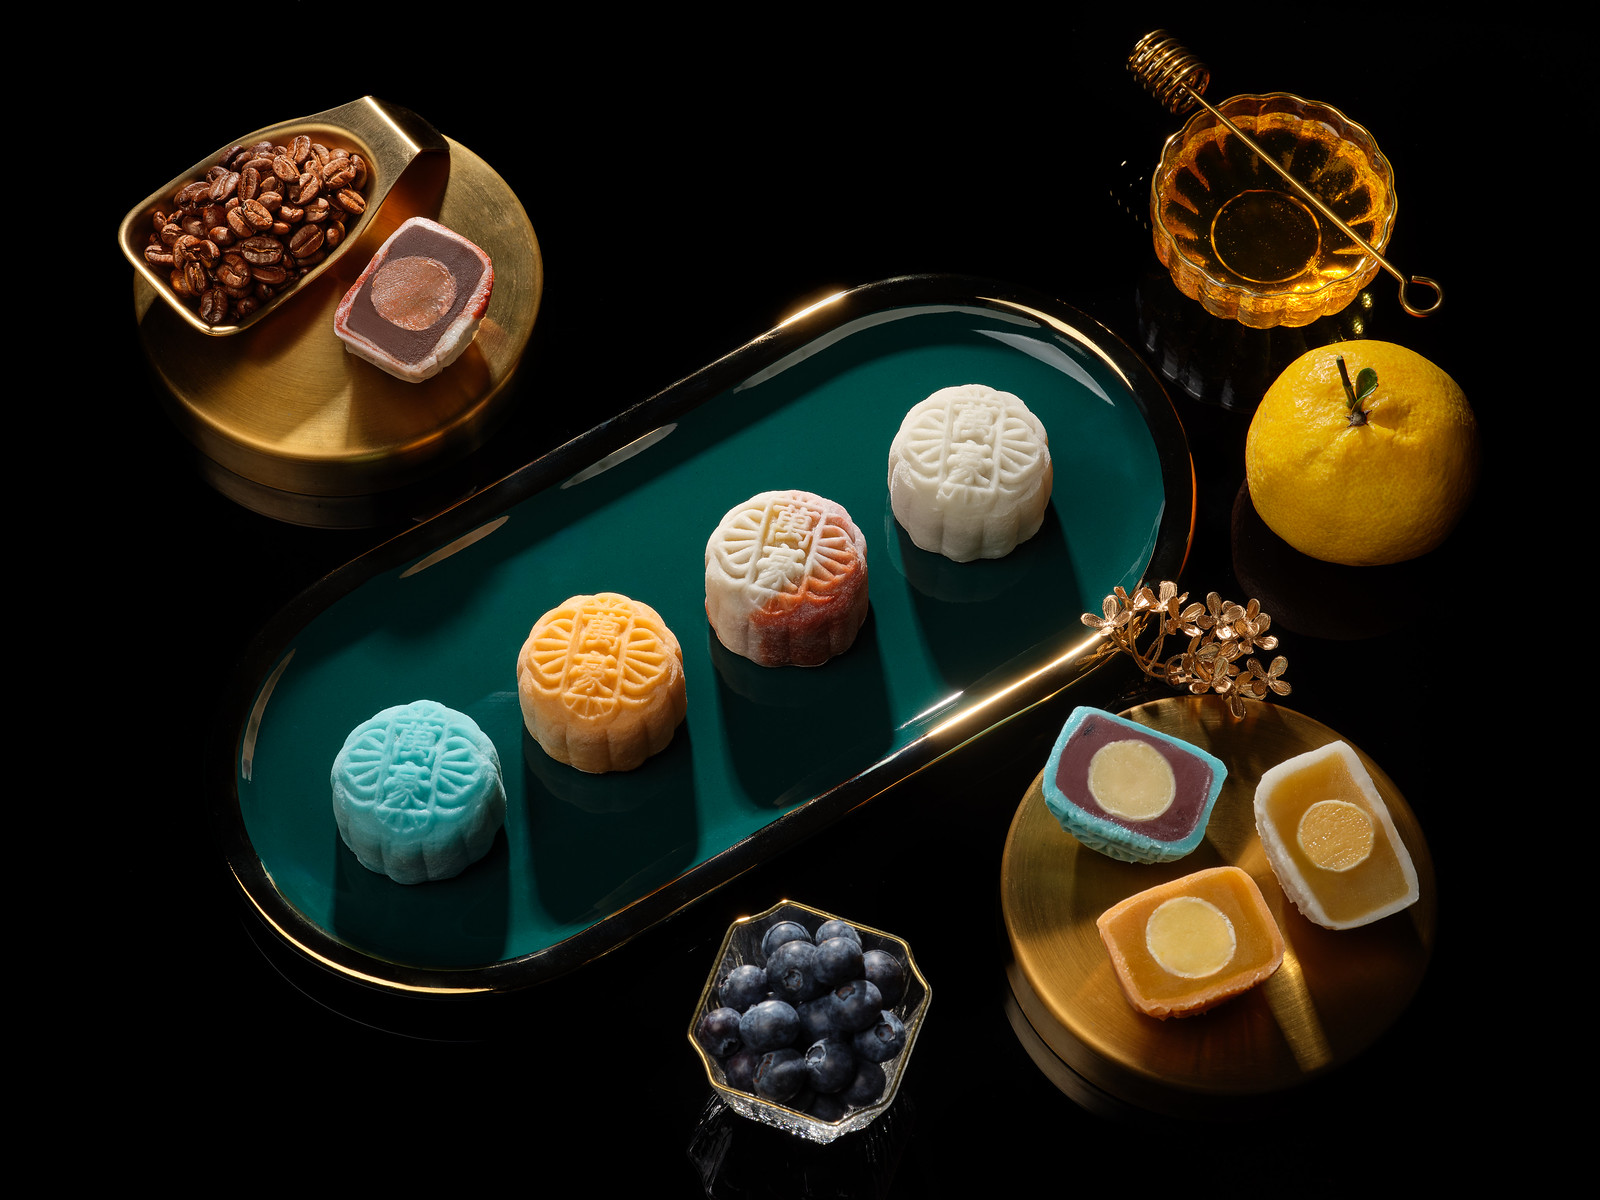 Assorted Snowskin Mooncakes - Singapore Marriott Tang Plaza Hotel